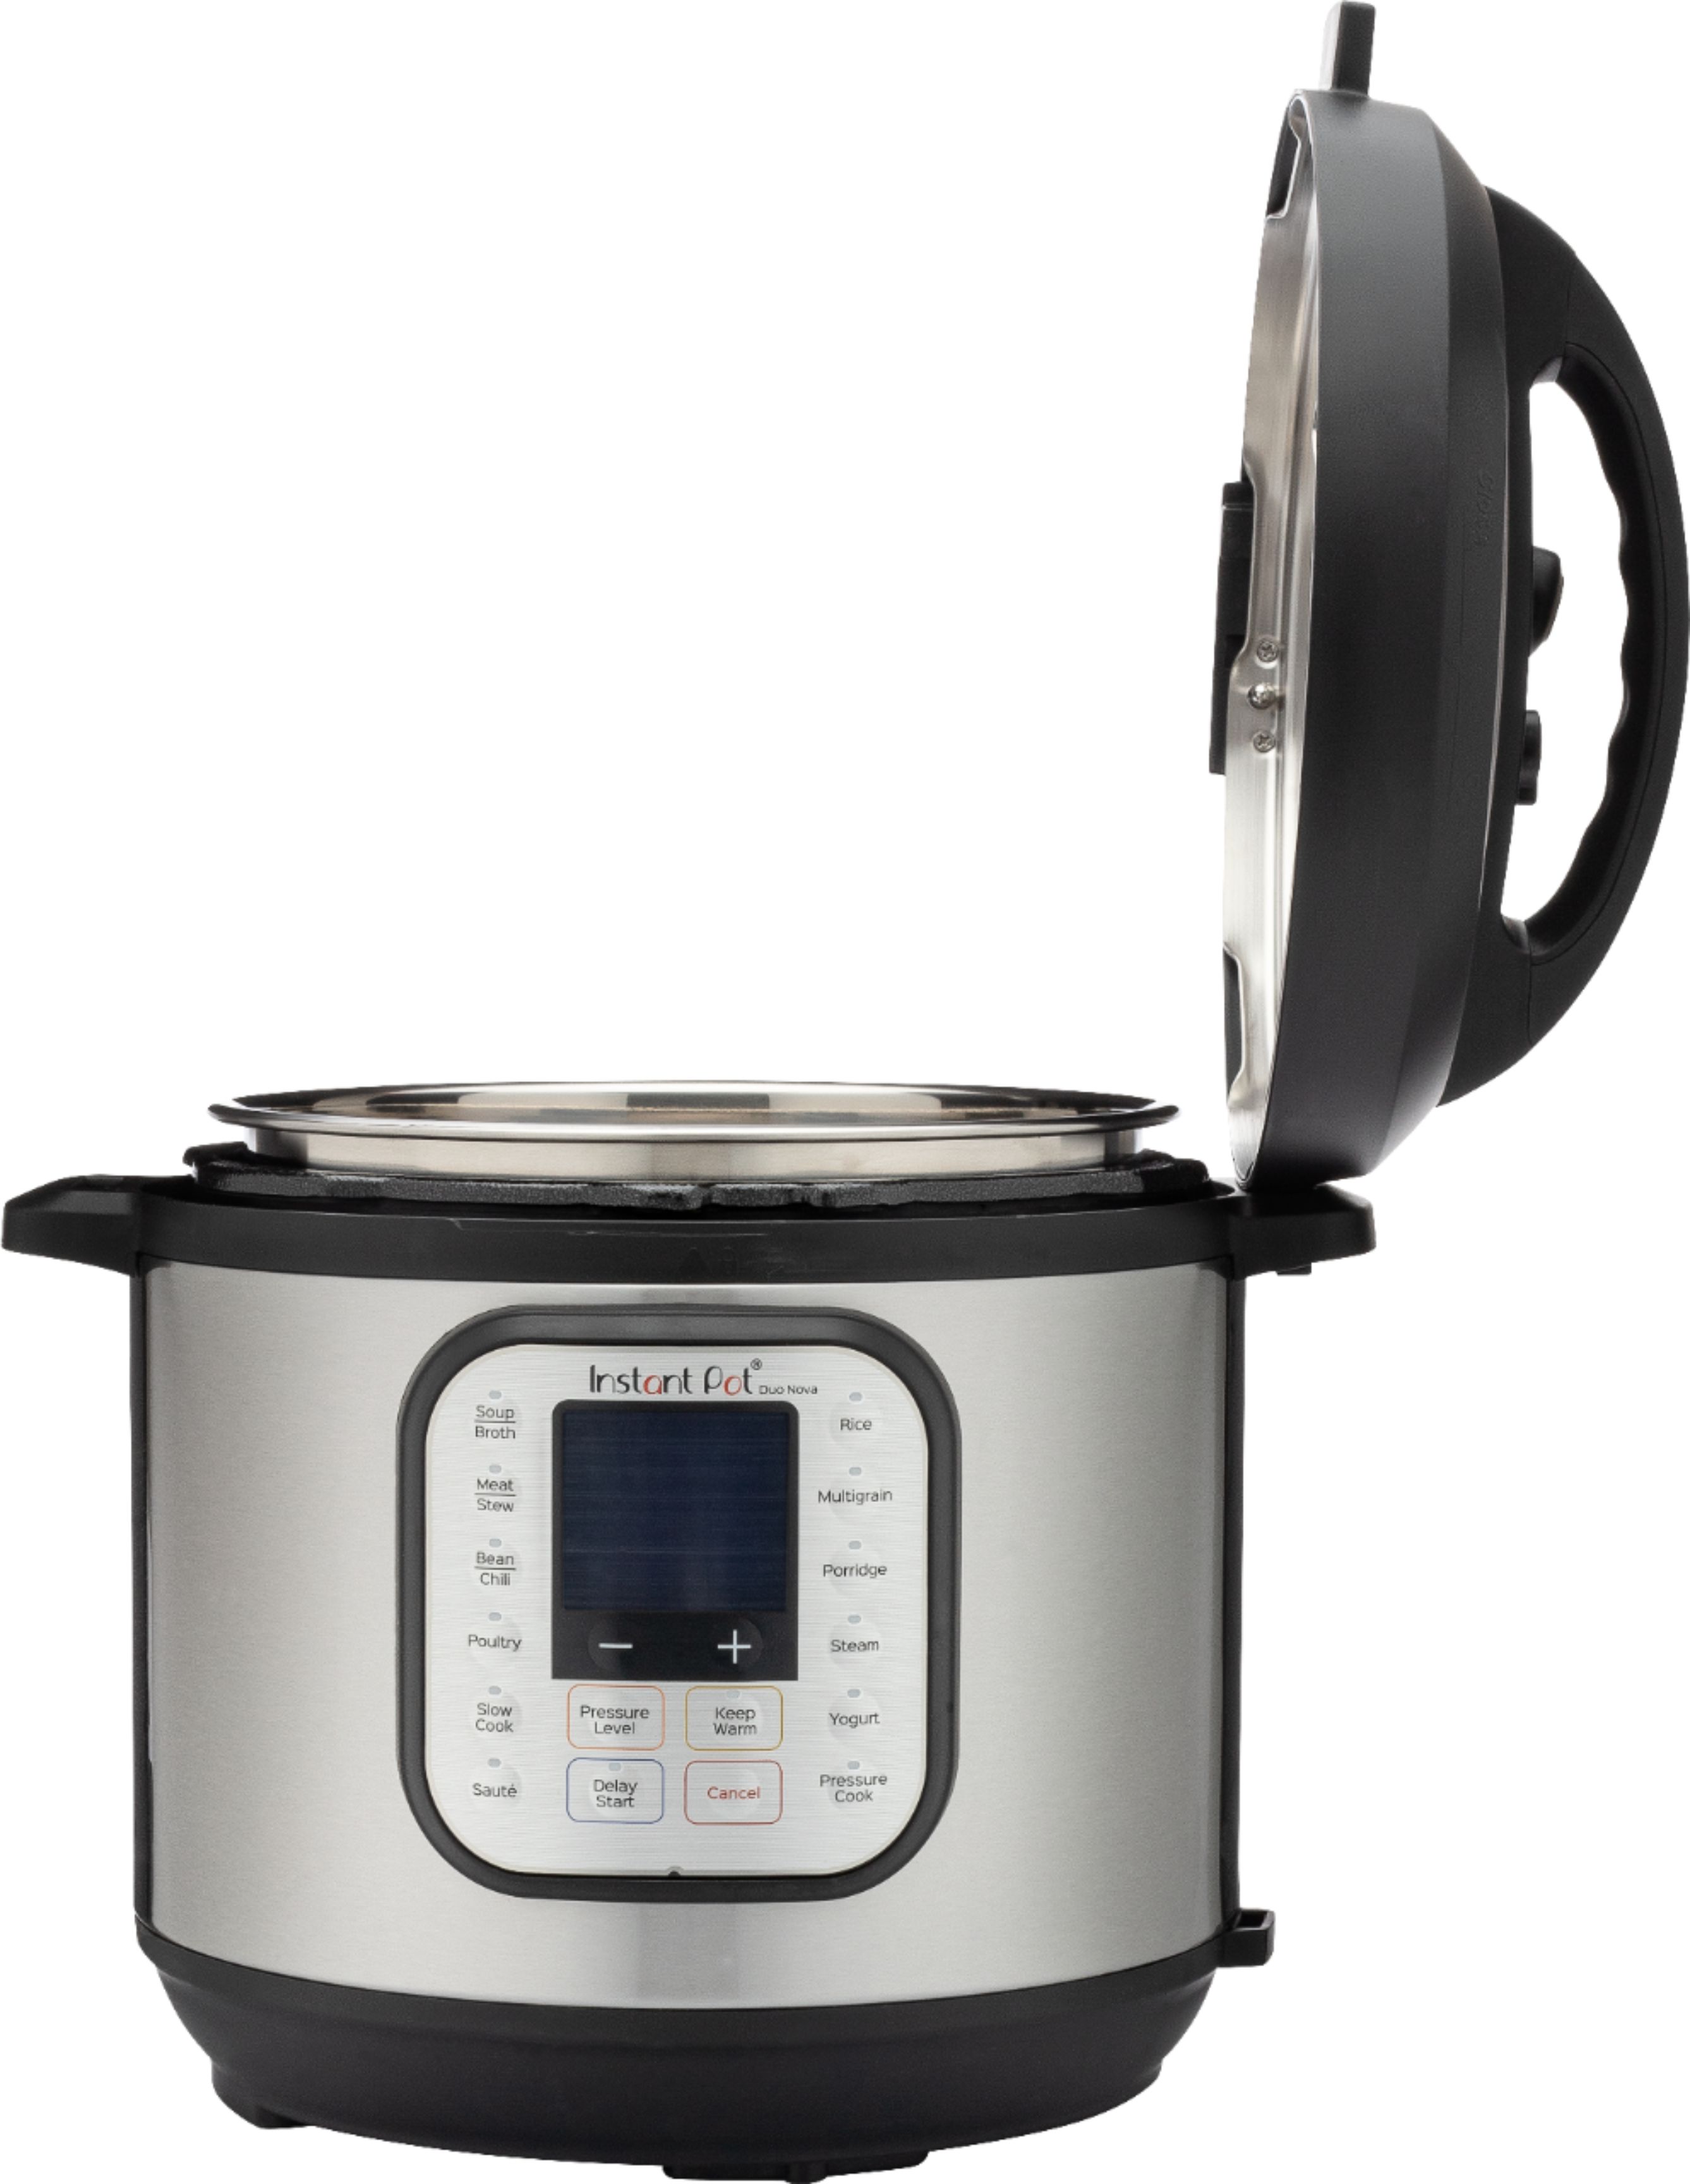 Questions and Answers: Instant Pot Duo Nova 6-Quart 7-in-1, One-Touch ...